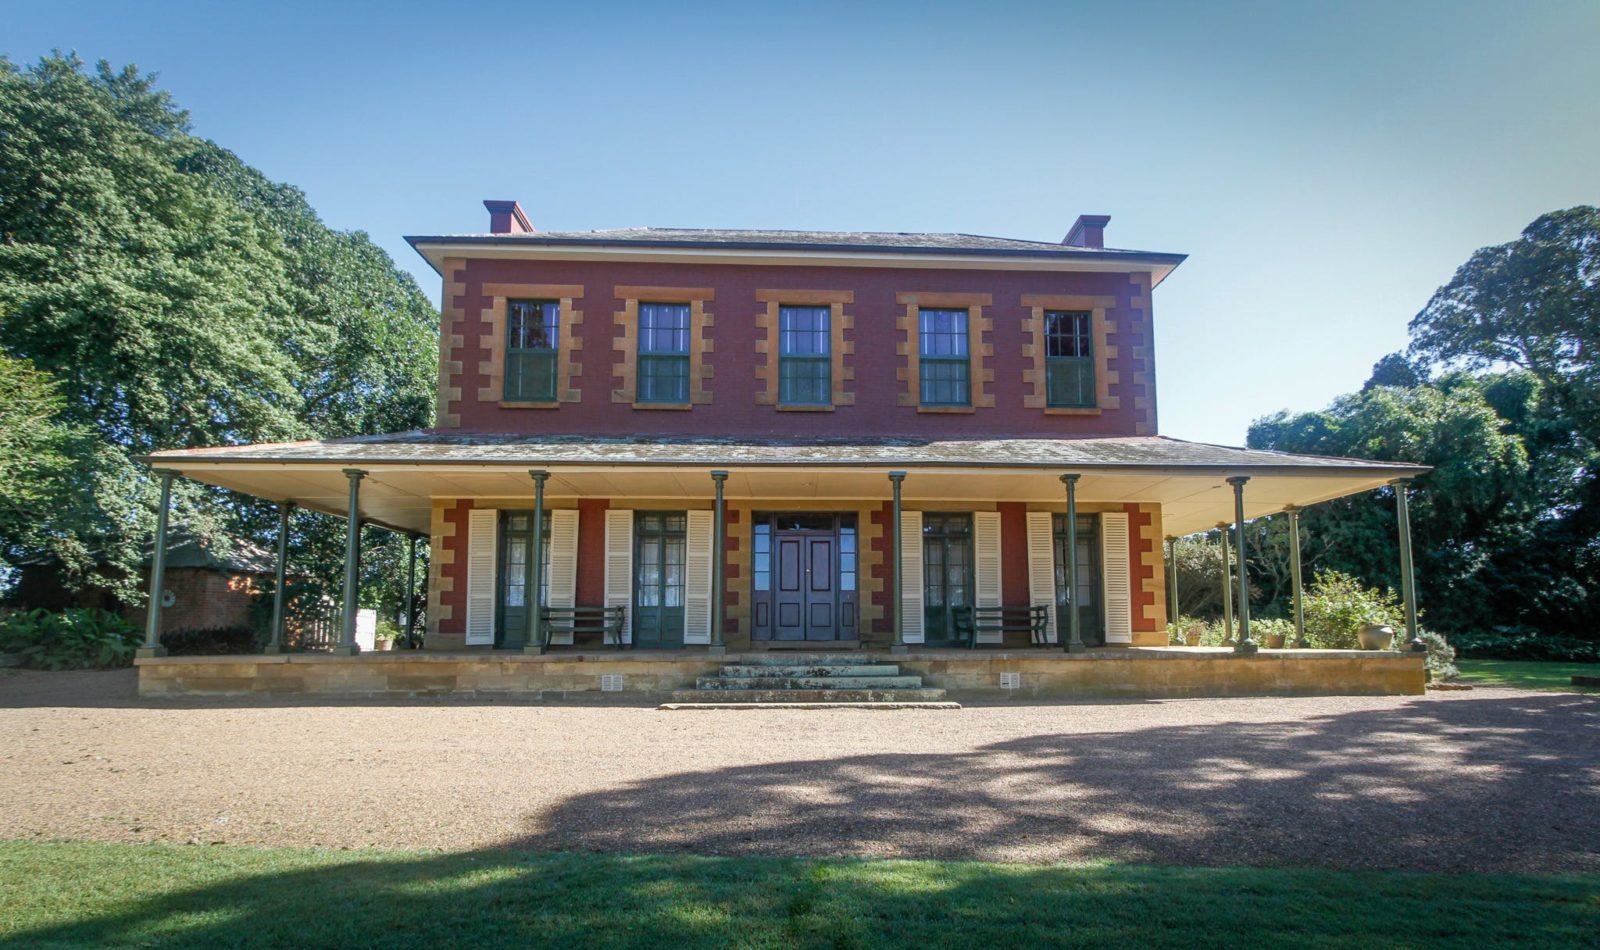 tocal homestead tours